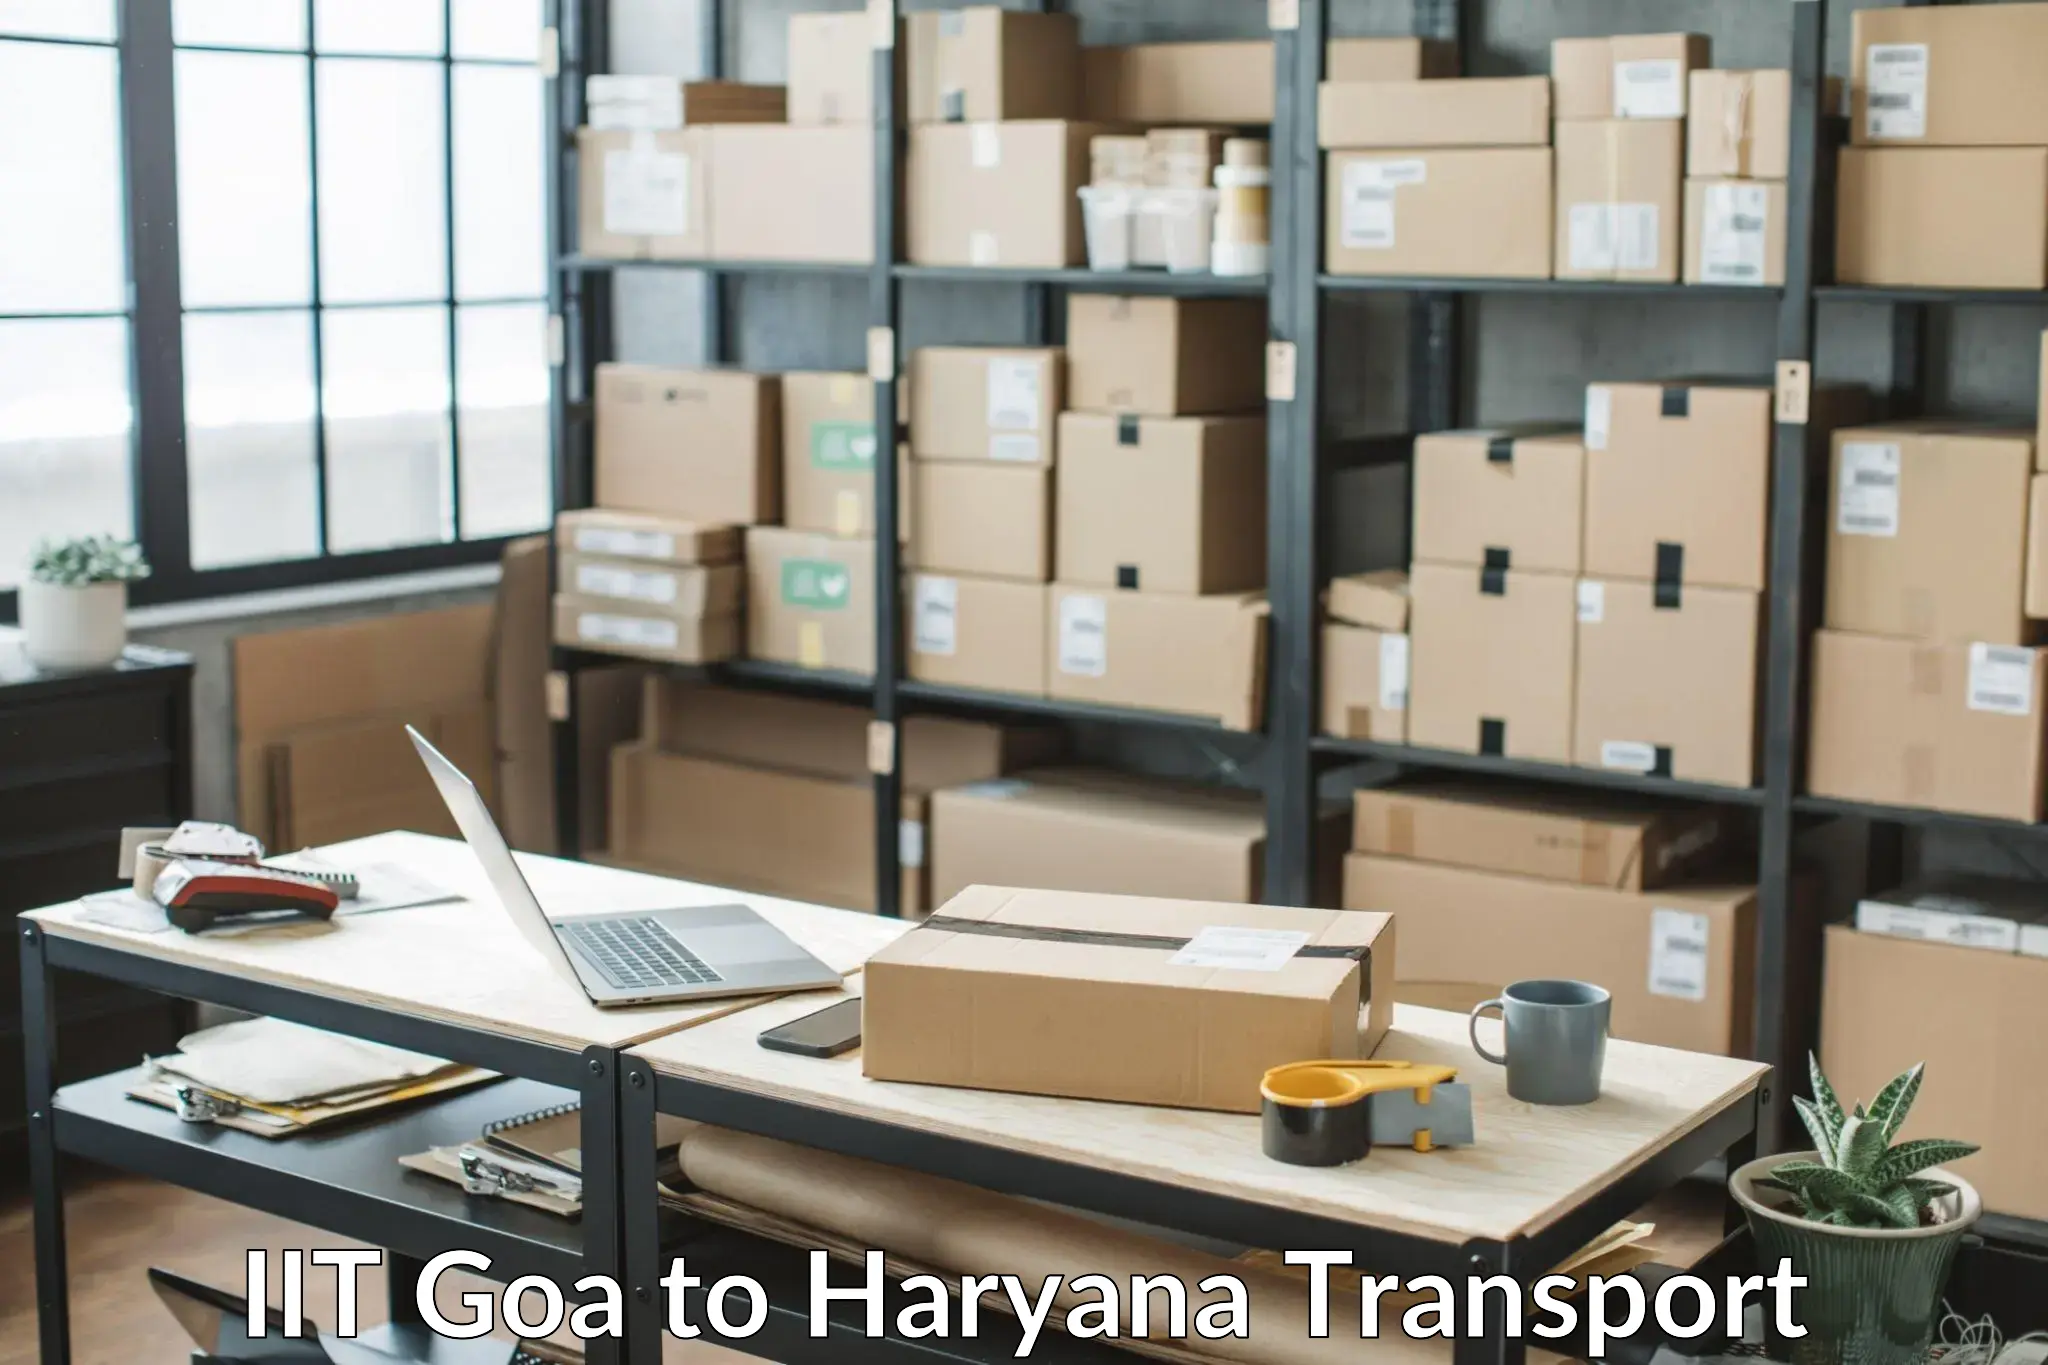 Cycle transportation service IIT Goa to Bahal